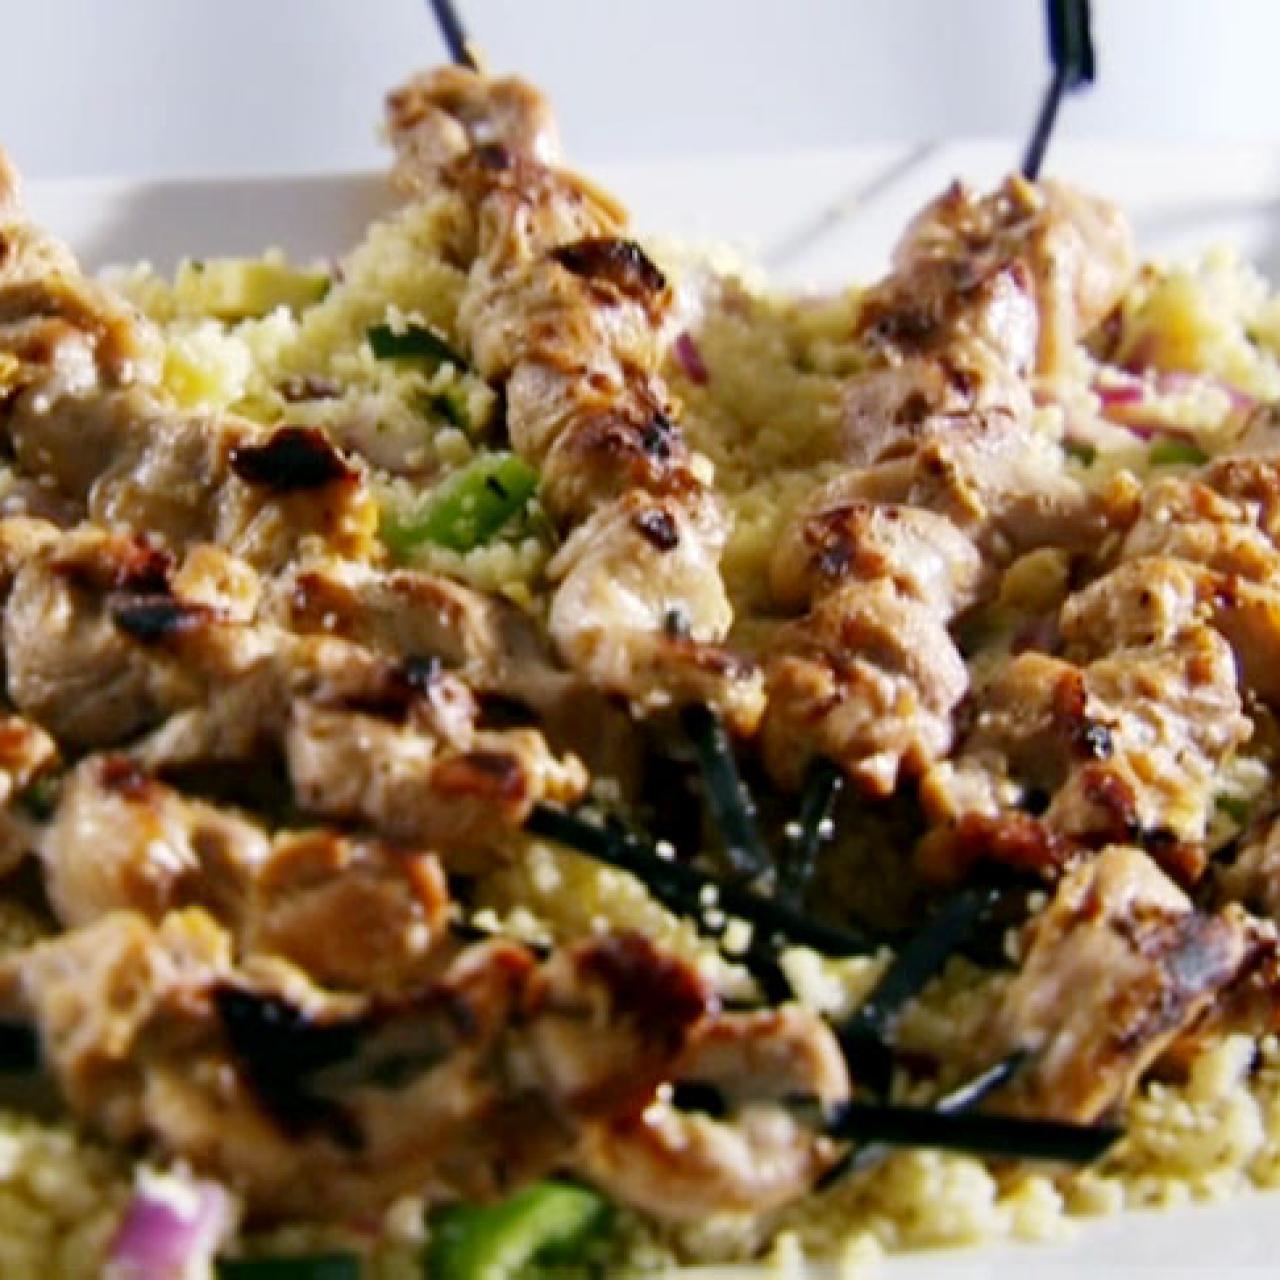 Grilled Chicken Skewers with Basil Couscous